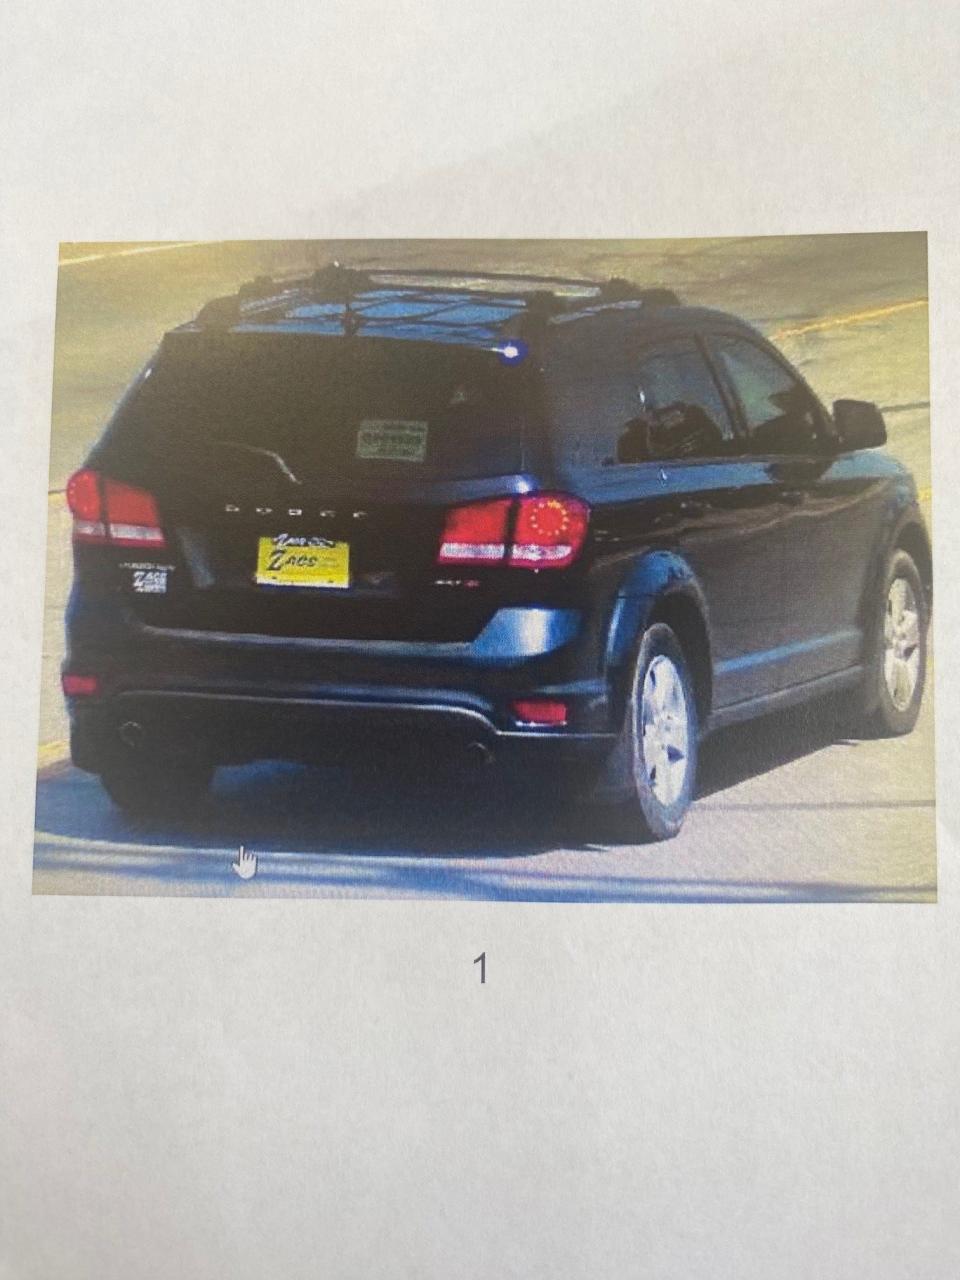 A Mansfield police officer tracking a theft report from Ace Hardware on Wednesday located this vehicle suspected as being the getaway car in Sunday's fatal shooting on Blymyer Avenue.